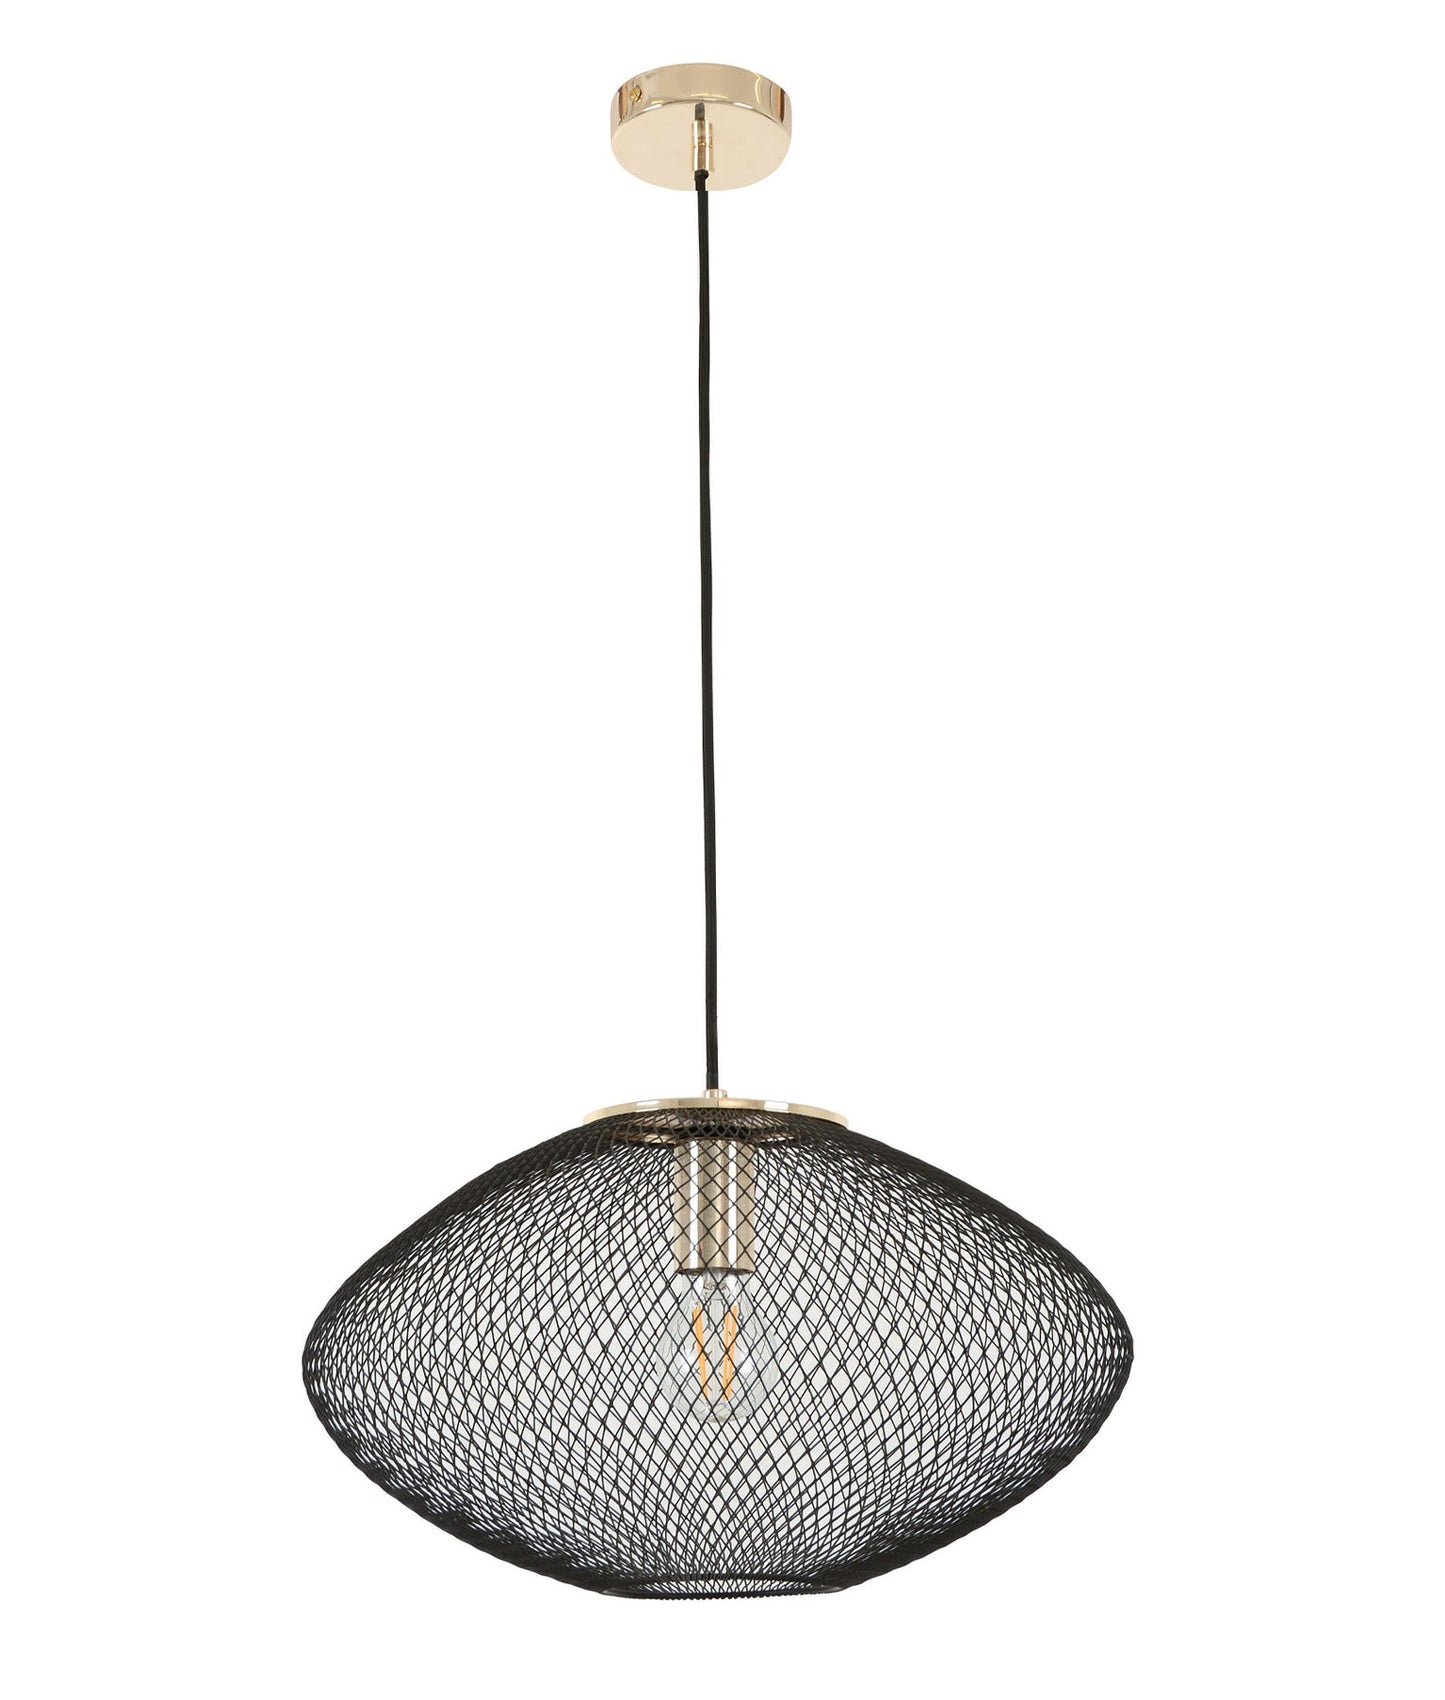 GOLPE: Modern Interior Large Oval Stainless Steel Pendant Lights